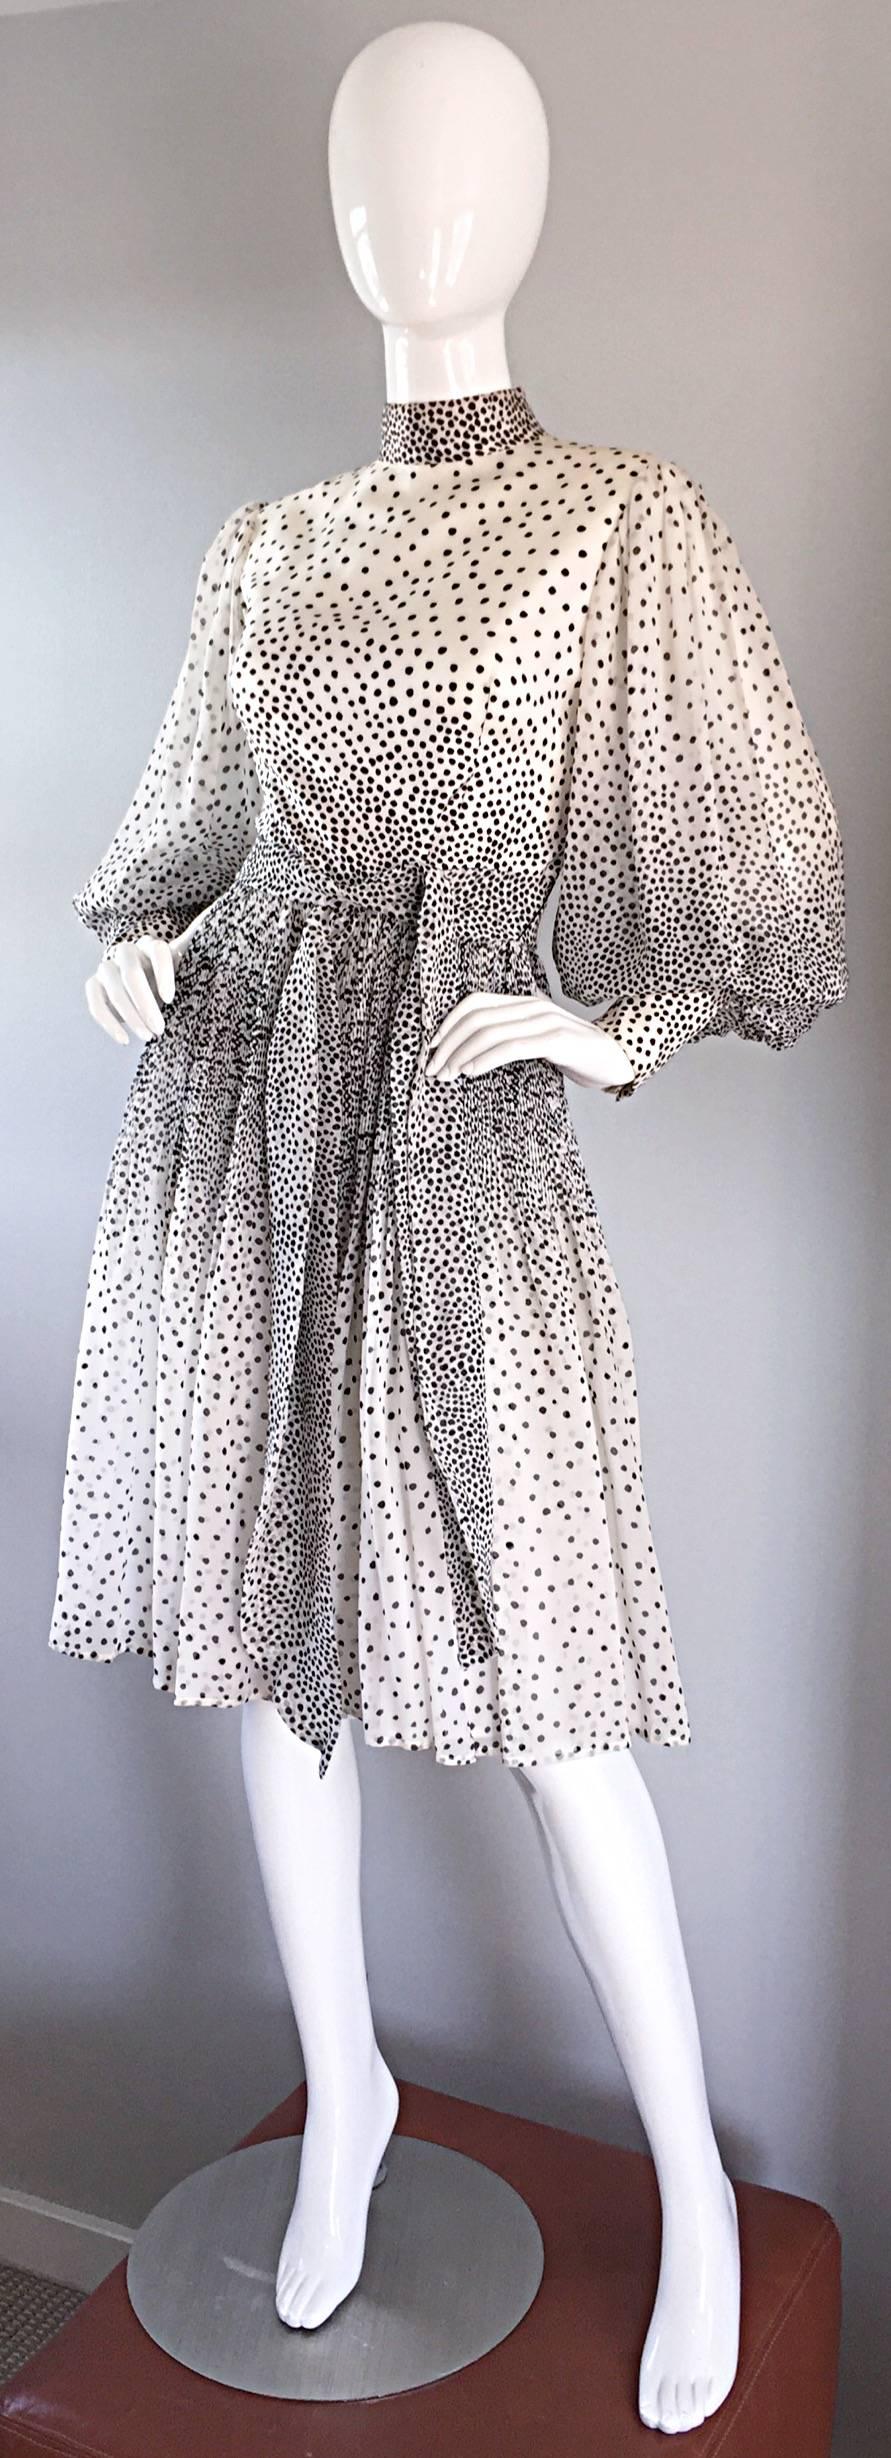 Chic 1960s Mollie Parnis silk dress, with extravagant chiffon balloon sleeves. Absolutely beautiful on! Black and white polka dots, in a 'splatter paint' pattern. Beautiful full chiffon skirt. Detachable matching chiffon belt, which also looks great